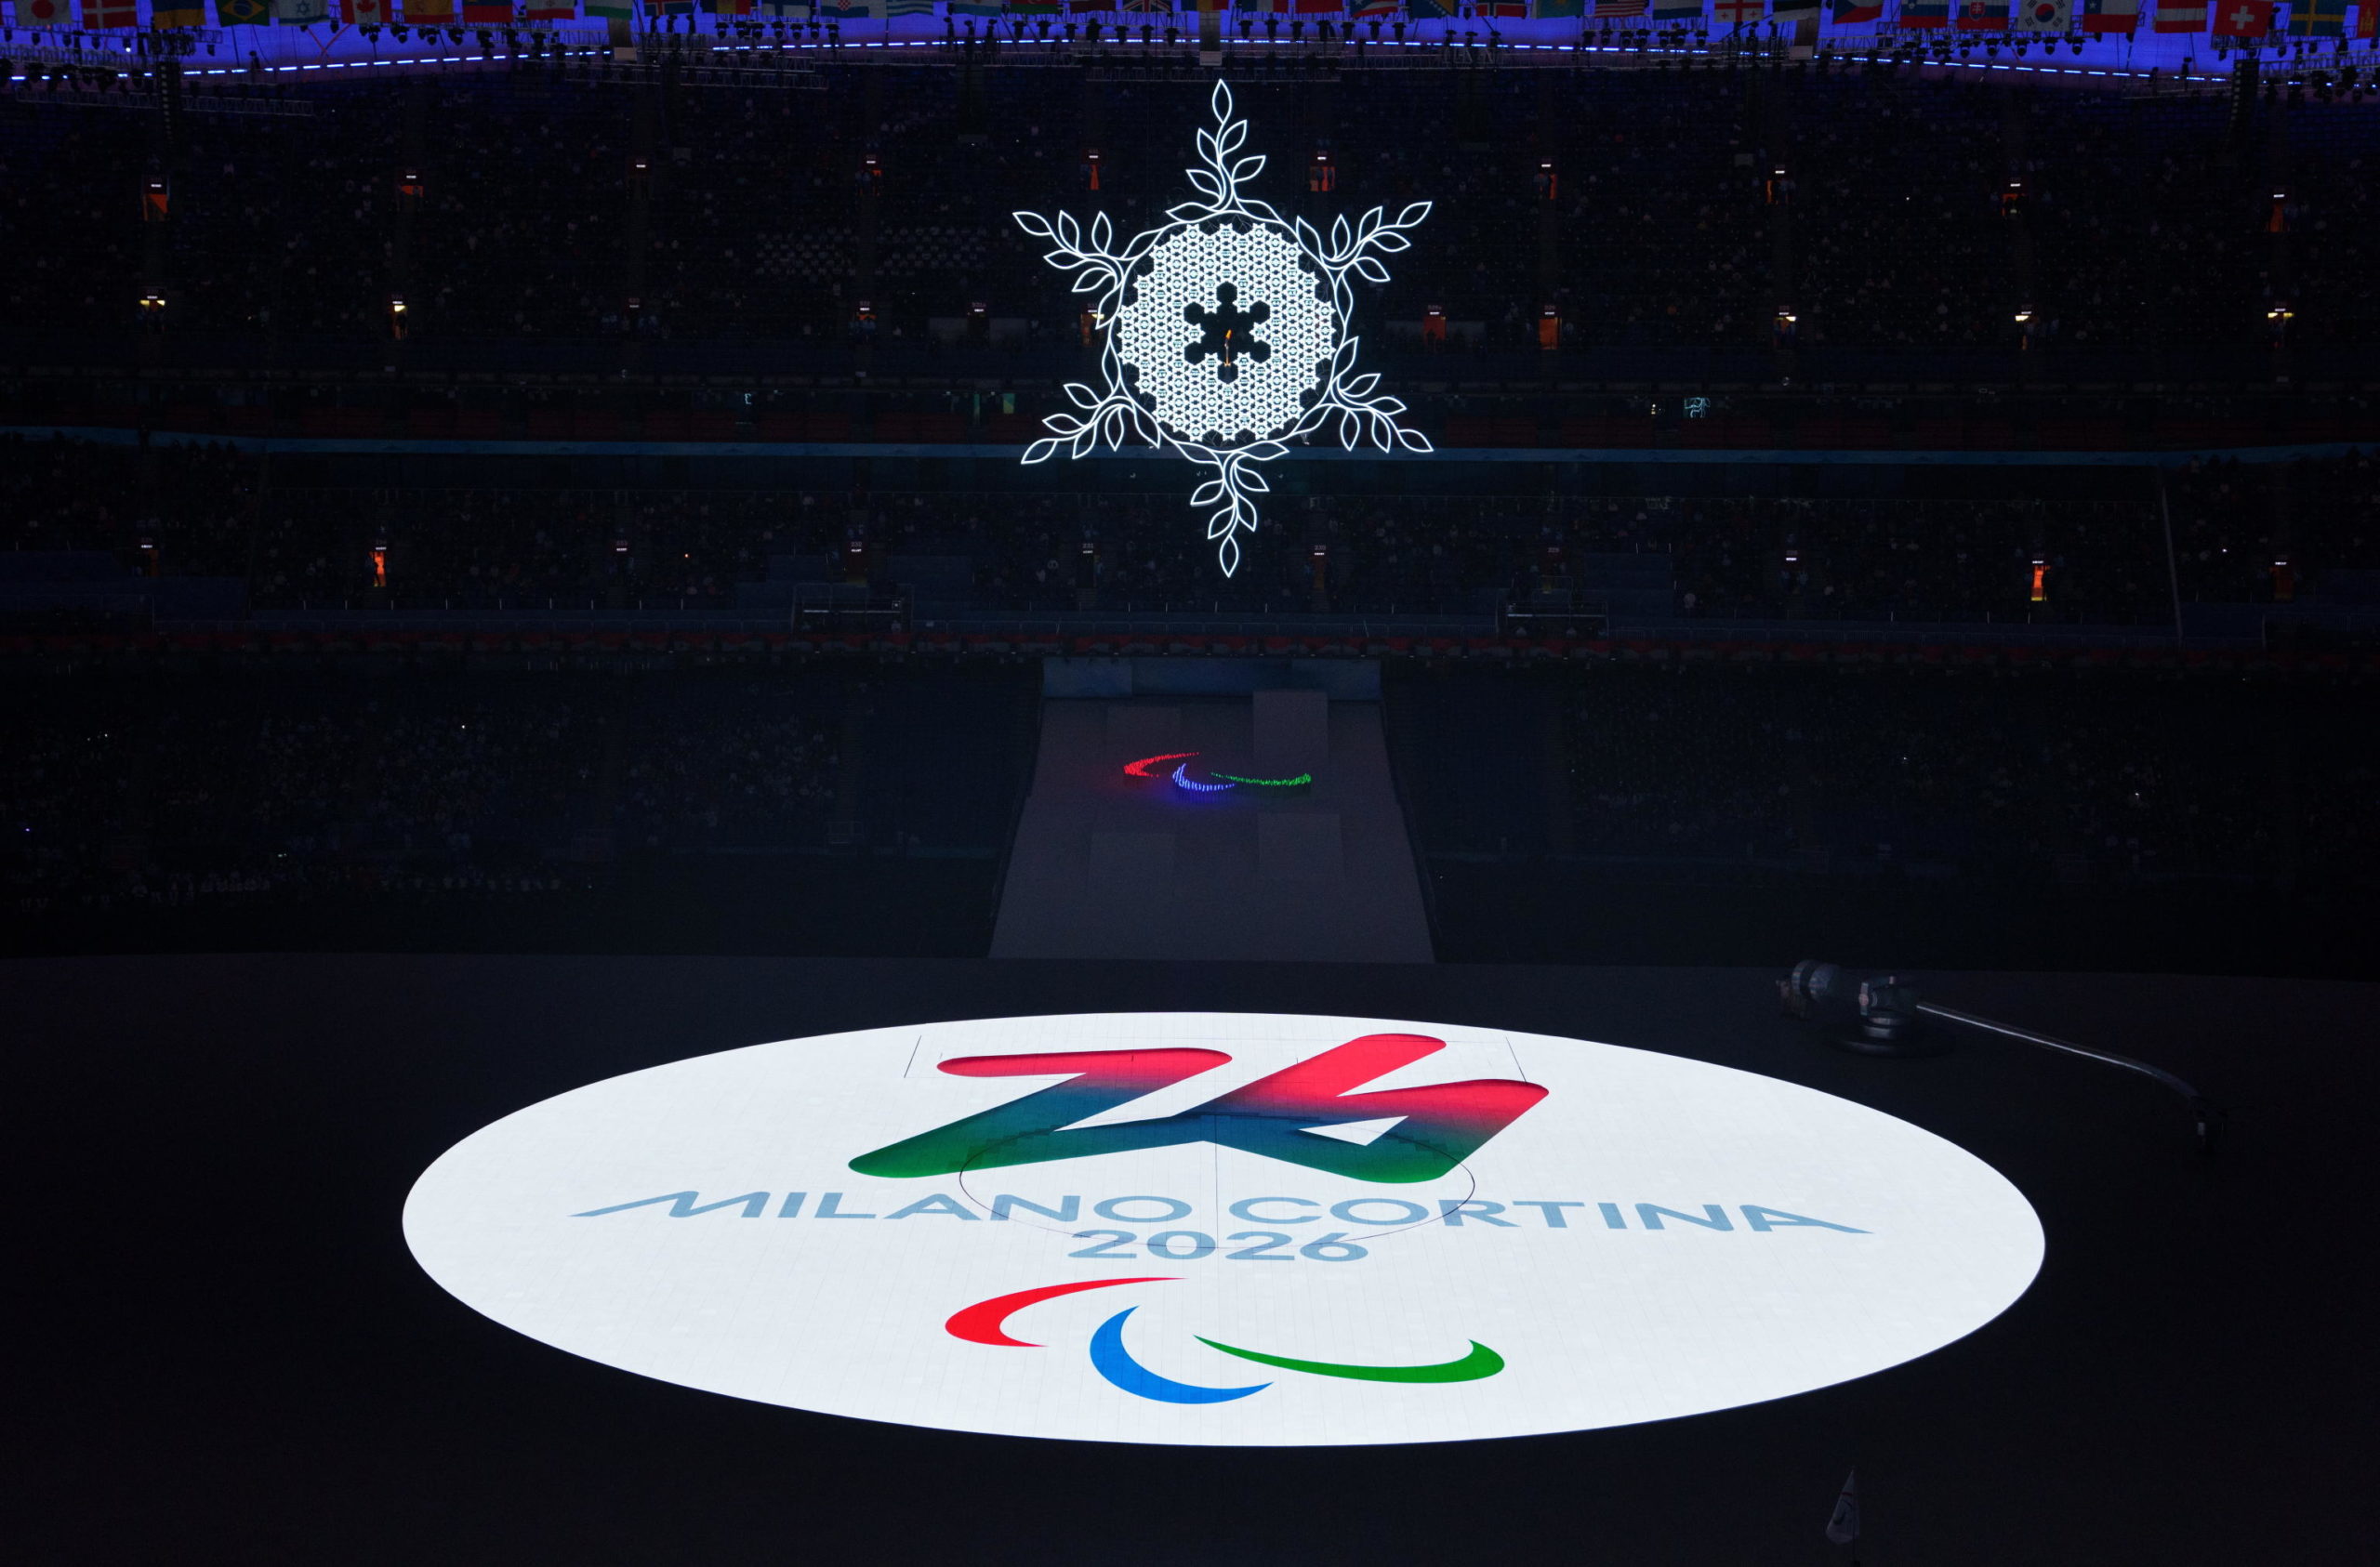 epa09821176 epa09821111 A handout photo made available by OIS/IOC shows Milano Cortina 2026 logo displayed on the stage following the Flag Handover Ceremony as part of the 2022 Winter Paralympic Games closing ceremony at the National Stadium in Beijing, China, 13 March 2022.  EPA/Bob Martin / HANDOUT  HANDOUT EDITORIAL USE ONLY/NO SALES HANDOUT EDITORIAL USE ONLY/NO SALES HANDOUT EDITORIAL USE ONLY/NO SALES HANDOUT EDITORIAL USE ONLY/NO SALES